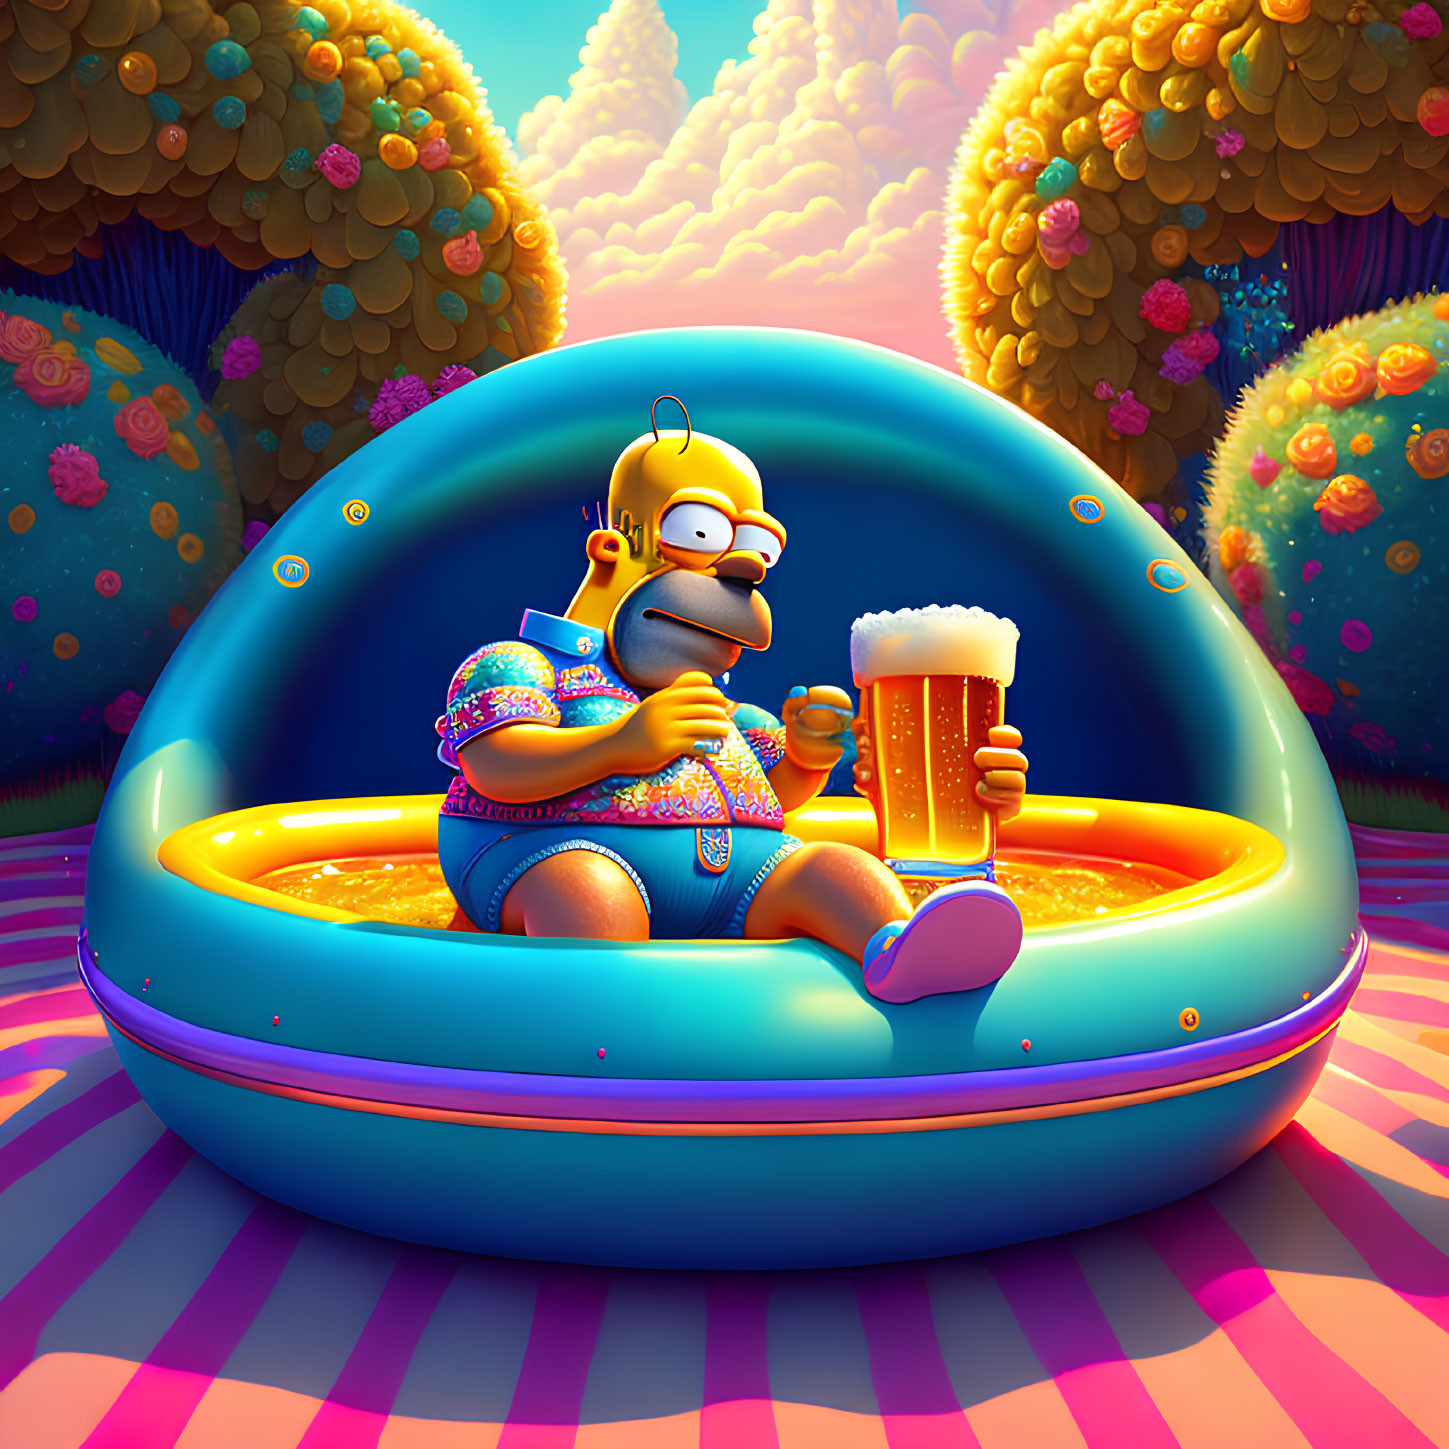 Animated character relaxing on pool float with beer mug, surreal colorful scenery